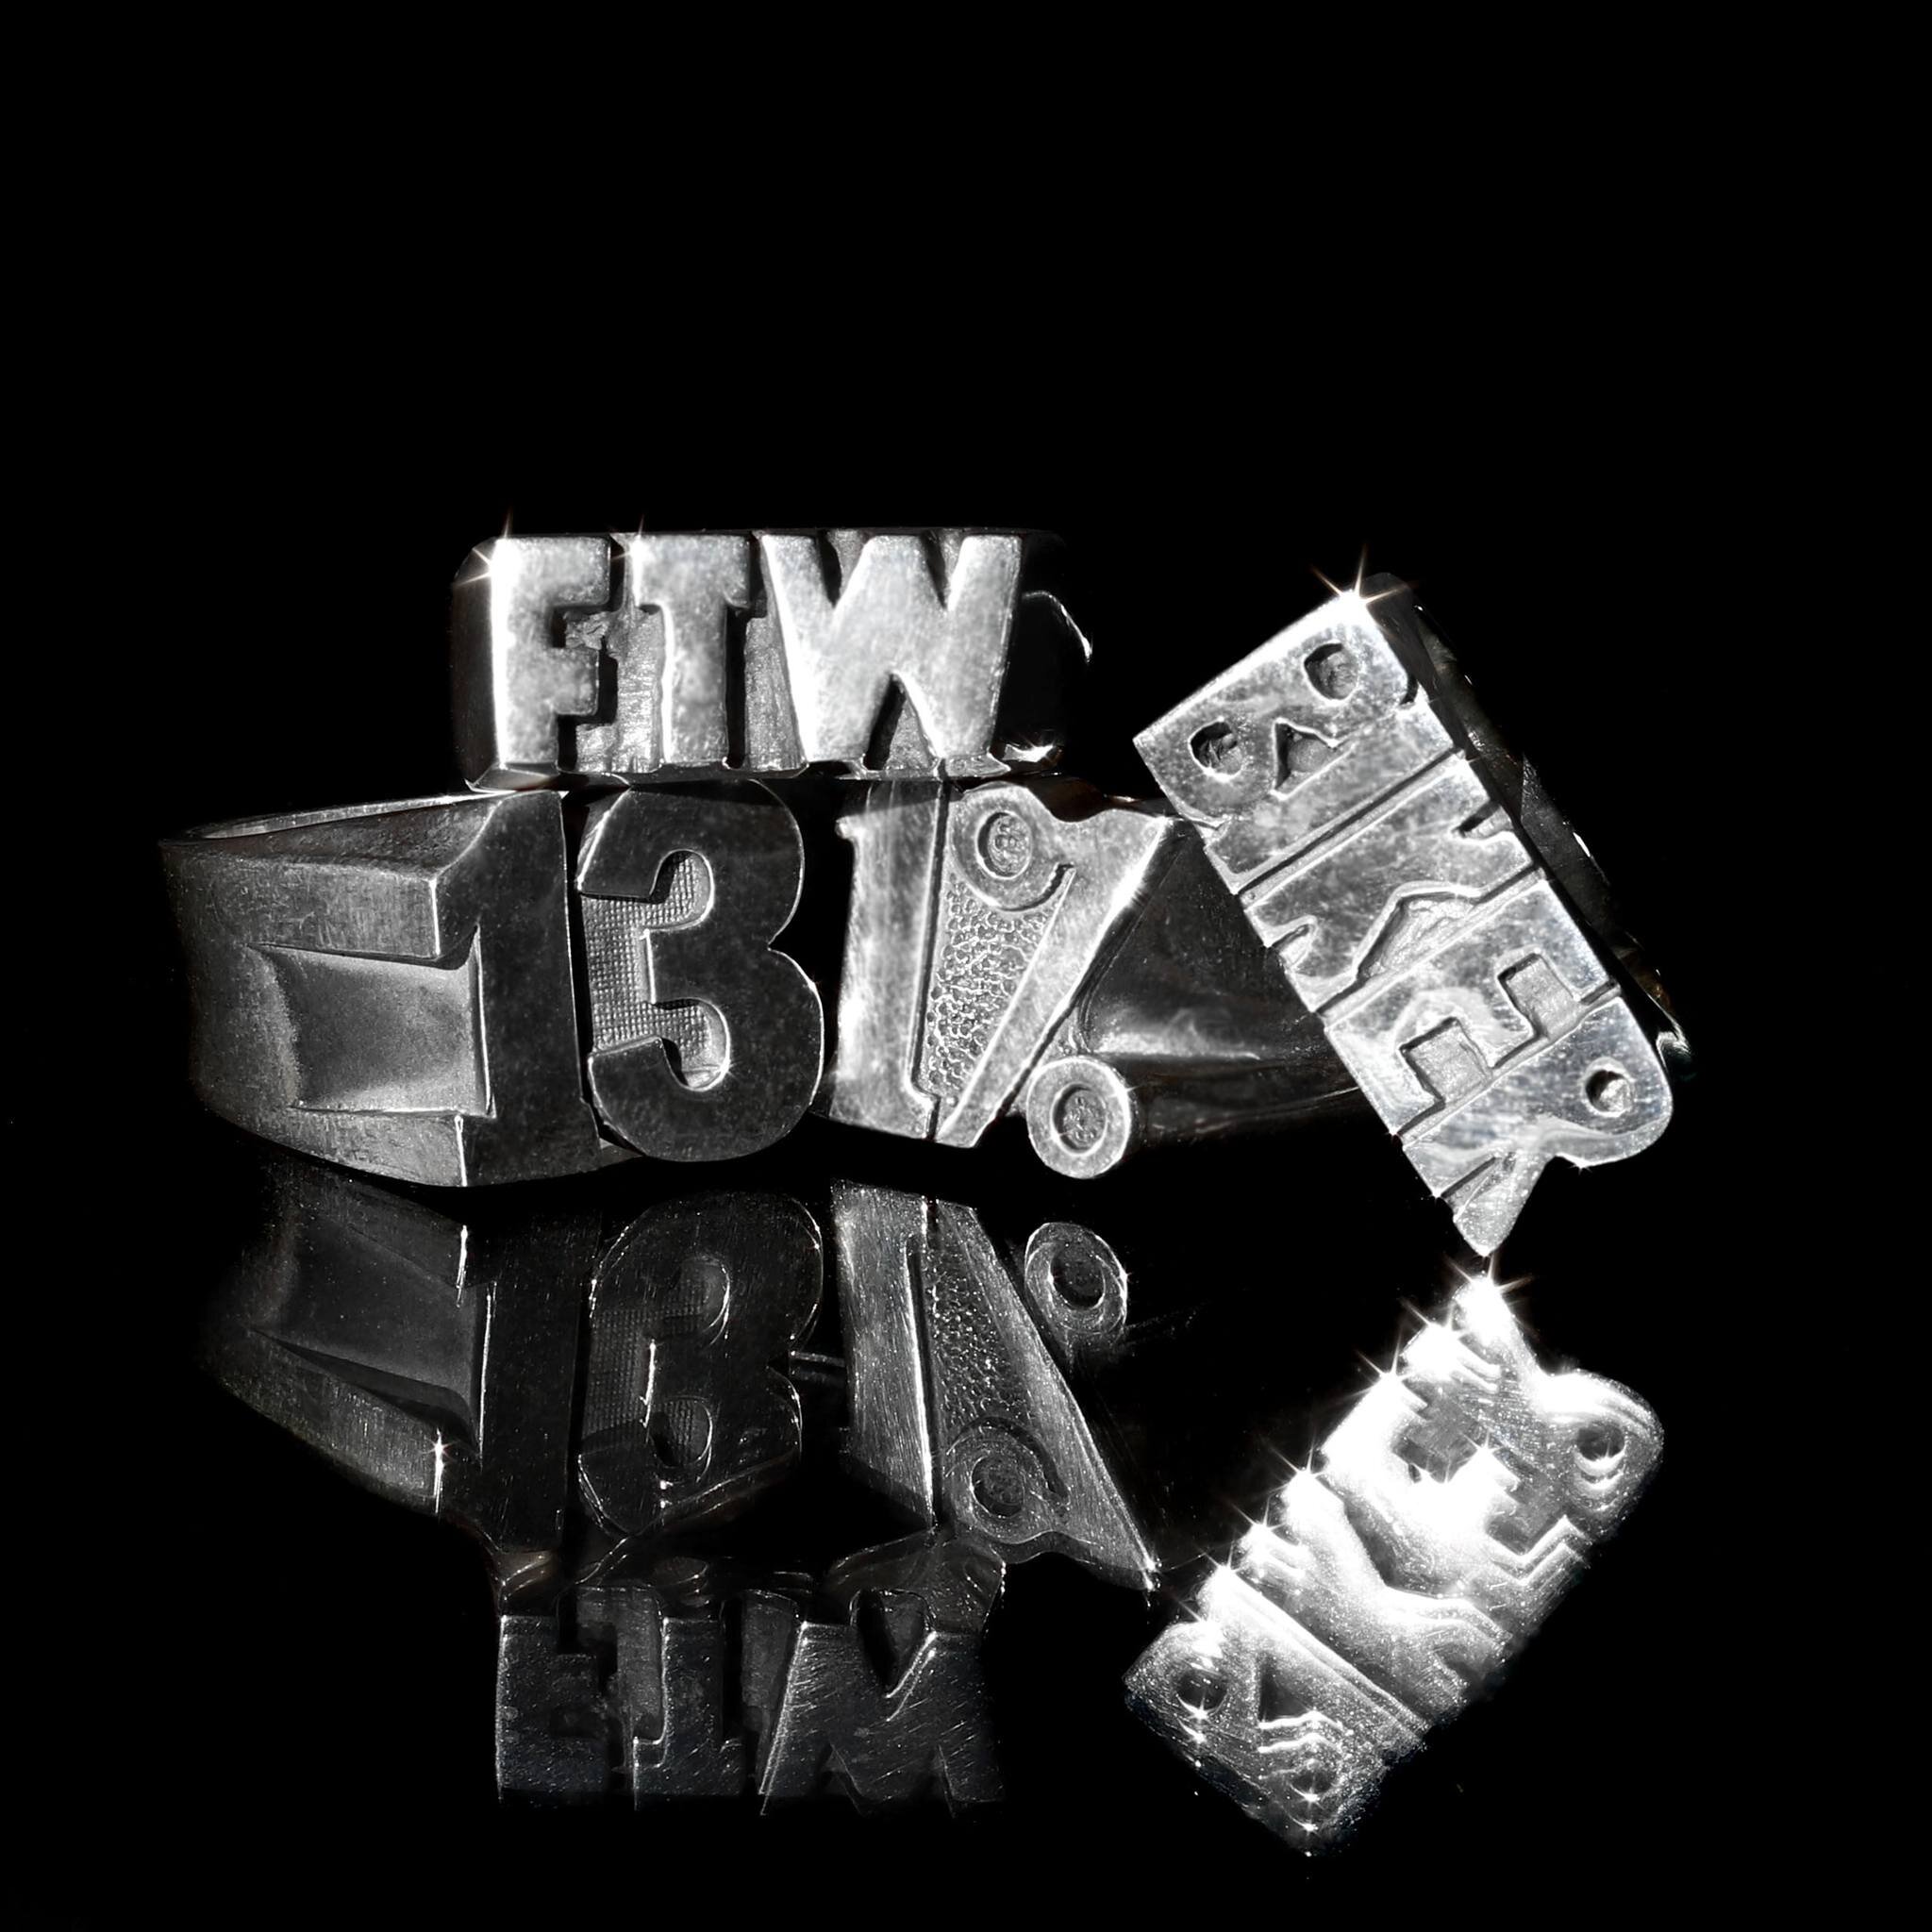 13, 1%, FTW and BIKER rings. More designs similar available over at #alastairscollection 

 #australianmade #925silver #925 #925SterlingSilver #alternativestyle #alternativestyle #bikerstyle #mensjewelry #mensjewellery #BigJewelry #bikerring #oldscho